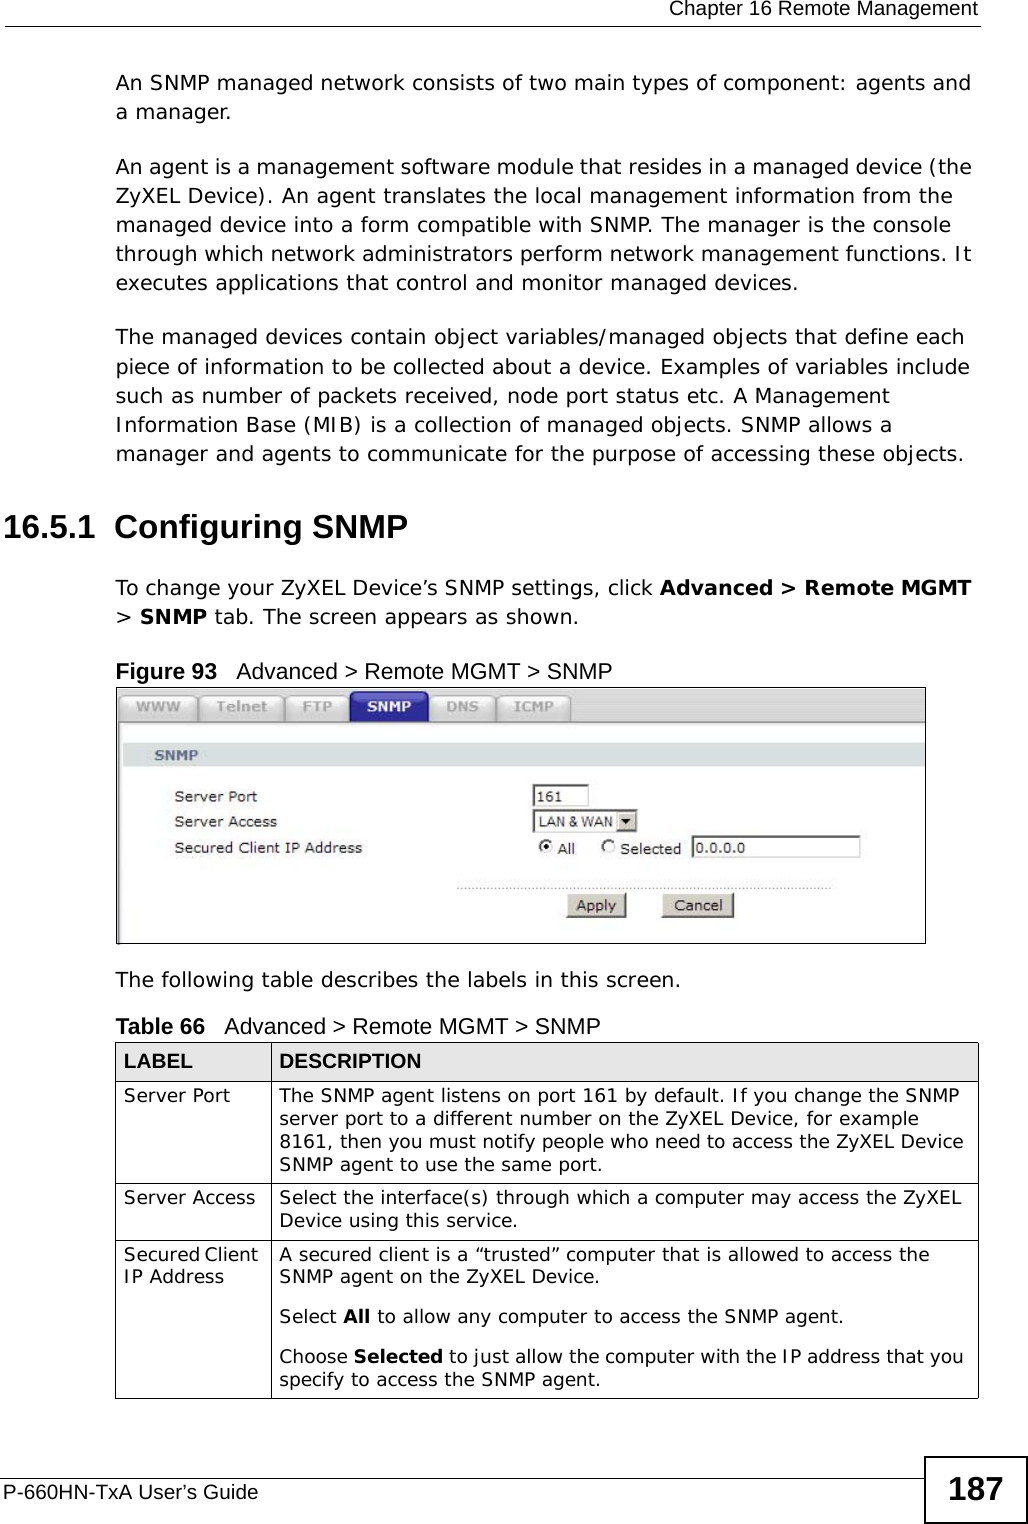  Chapter 16 Remote ManagementP-660HN-TxA User’s Guide 187An SNMP managed network consists of two main types of component: agents and a manager. An agent is a management software module that resides in a managed device (the ZyXEL Device). An agent translates the local management information from the managed device into a form compatible with SNMP. The manager is the console through which network administrators perform network management functions. It executes applications that control and monitor managed devices. The managed devices contain object variables/managed objects that define each piece of information to be collected about a device. Examples of variables include such as number of packets received, node port status etc. A Management Information Base (MIB) is a collection of managed objects. SNMP allows a manager and agents to communicate for the purpose of accessing these objects.16.5.1  Configuring SNMP To change your ZyXEL Device’s SNMP settings, click Advanced &gt; Remote MGMT &gt; SNMP tab. The screen appears as shown.Figure 93   Advanced &gt; Remote MGMT &gt; SNMPThe following table describes the labels in this screen.Table 66   Advanced &gt; Remote MGMT &gt; SNMPLABEL DESCRIPTIONServer Port The SNMP agent listens on port 161 by default. If you change the SNMP server port to a different number on the ZyXEL Device, for example 8161, then you must notify people who need to access the ZyXEL Device SNMP agent to use the same port.Server Access  Select the interface(s) through which a computer may access the ZyXEL Device using this service.Secured Client IP Address A secured client is a “trusted” computer that is allowed to access the SNMP agent on the ZyXEL Device.Select All to allow any computer to access the SNMP agent.Choose Selected to just allow the computer with the IP address that you specify to access the SNMP agent.